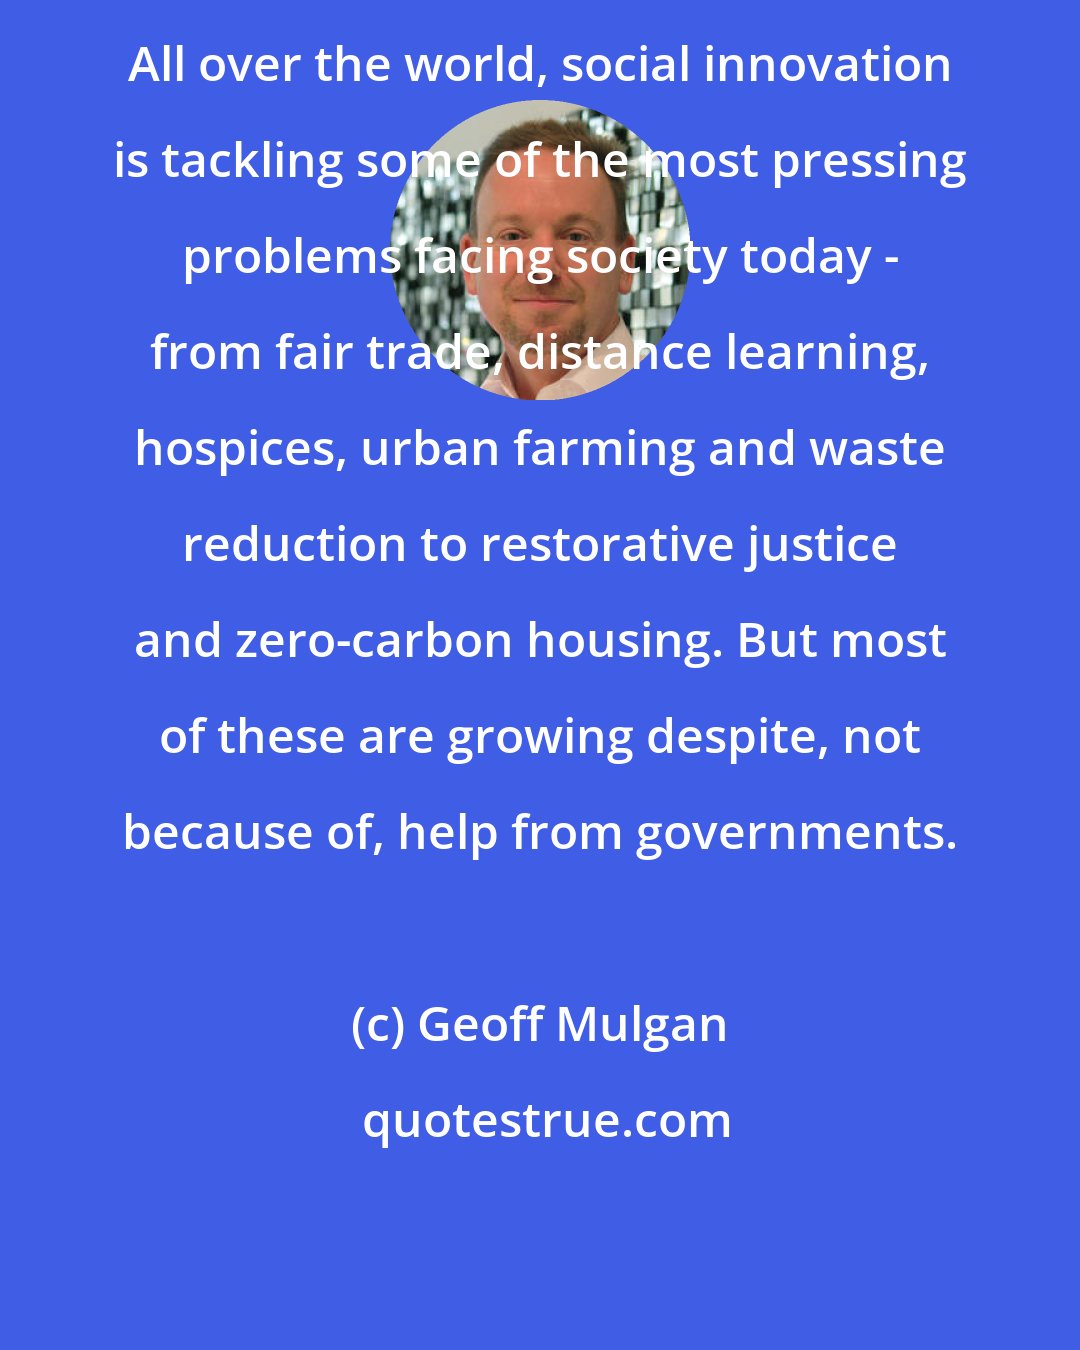 Geoff Mulgan: All over the world, social innovation is tackling some of the most pressing problems facing society today - from fair trade, distance learning, hospices, urban farming and waste reduction to restorative justice and zero-carbon housing. But most of these are growing despite, not because of, help from governments.